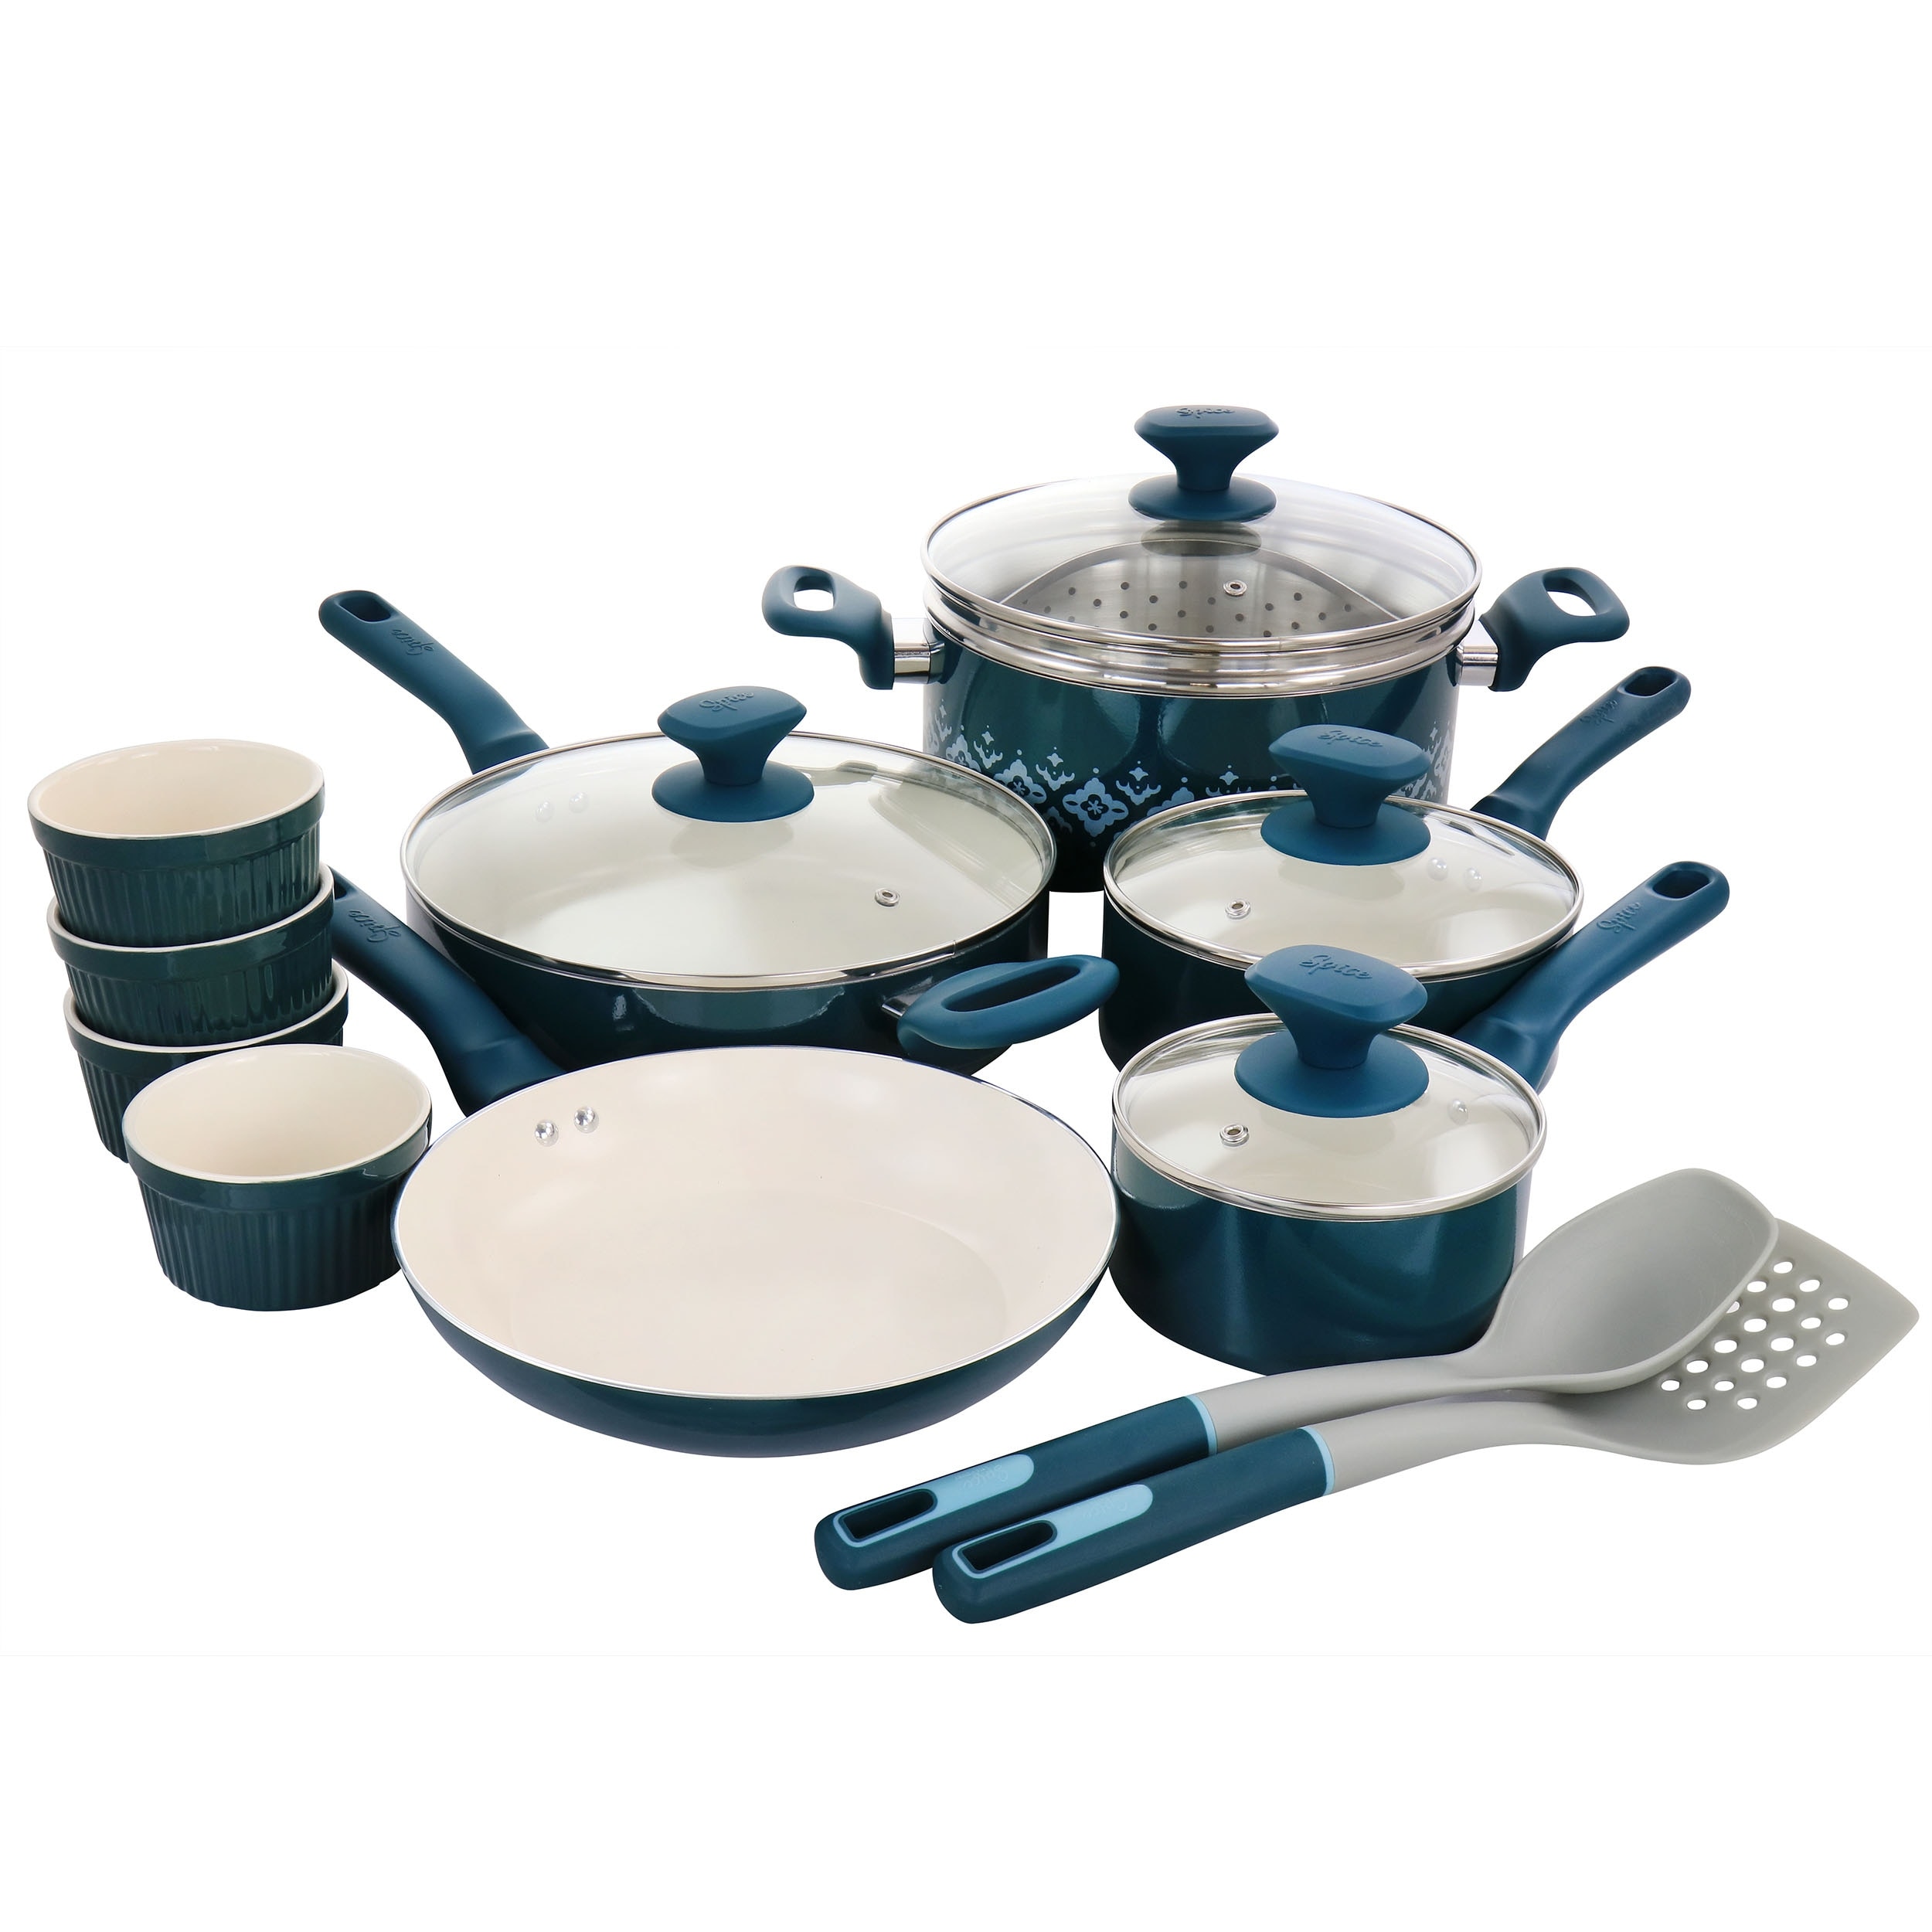 Spice by Tia Mowry 10-Piece Healthy Non-Stick Ceramic Cookware Set - Teal